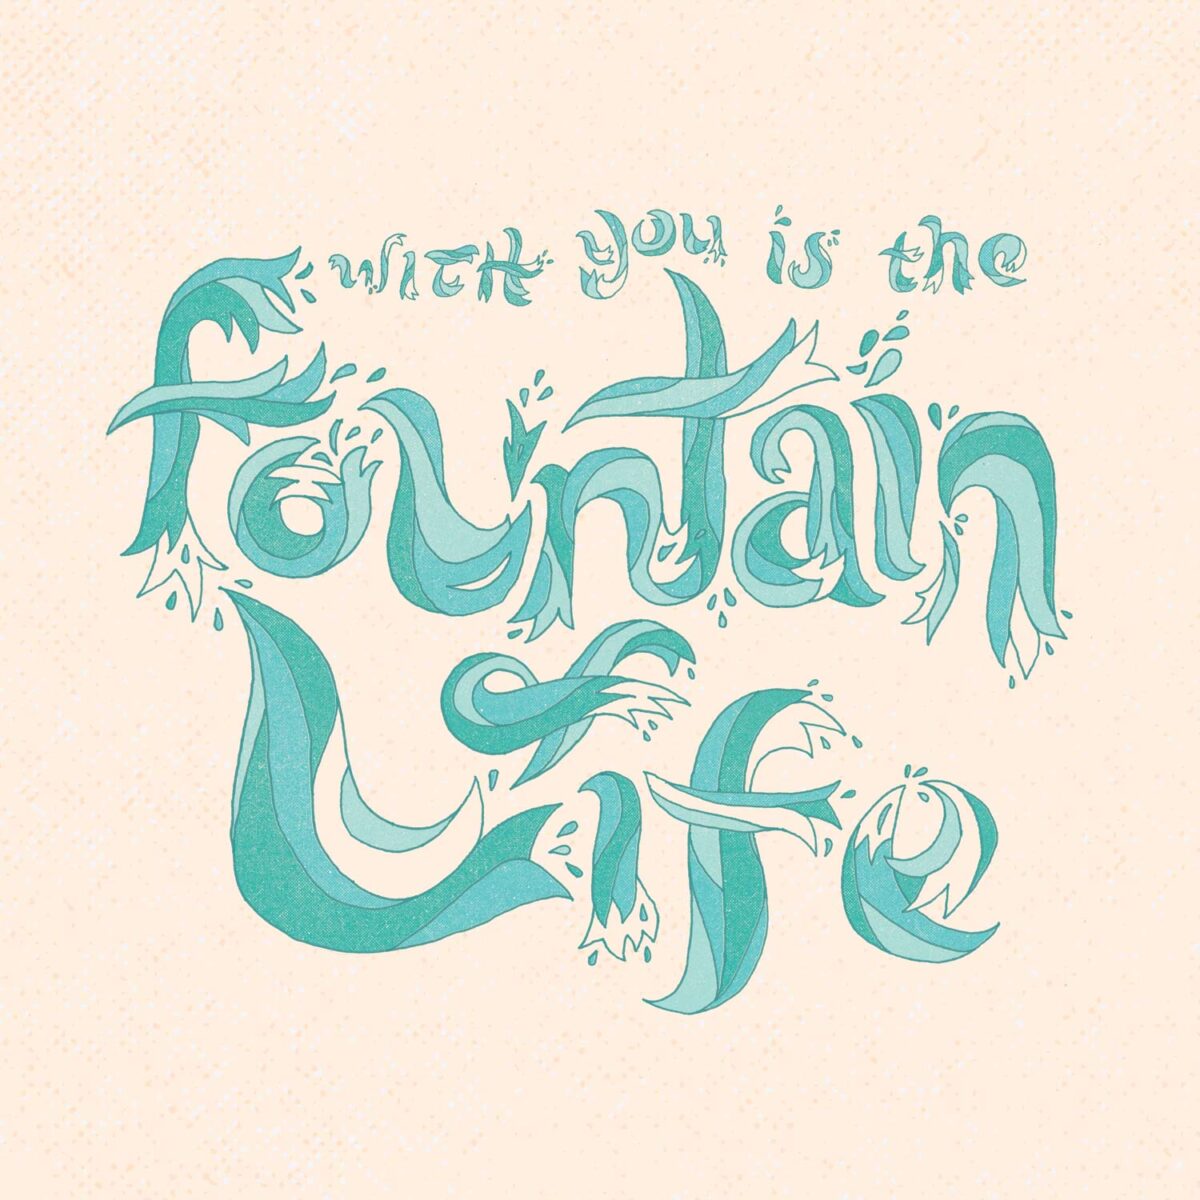 Psalm 36: hand Lettering in the shape of water and waves that reads with you in the fountain of life